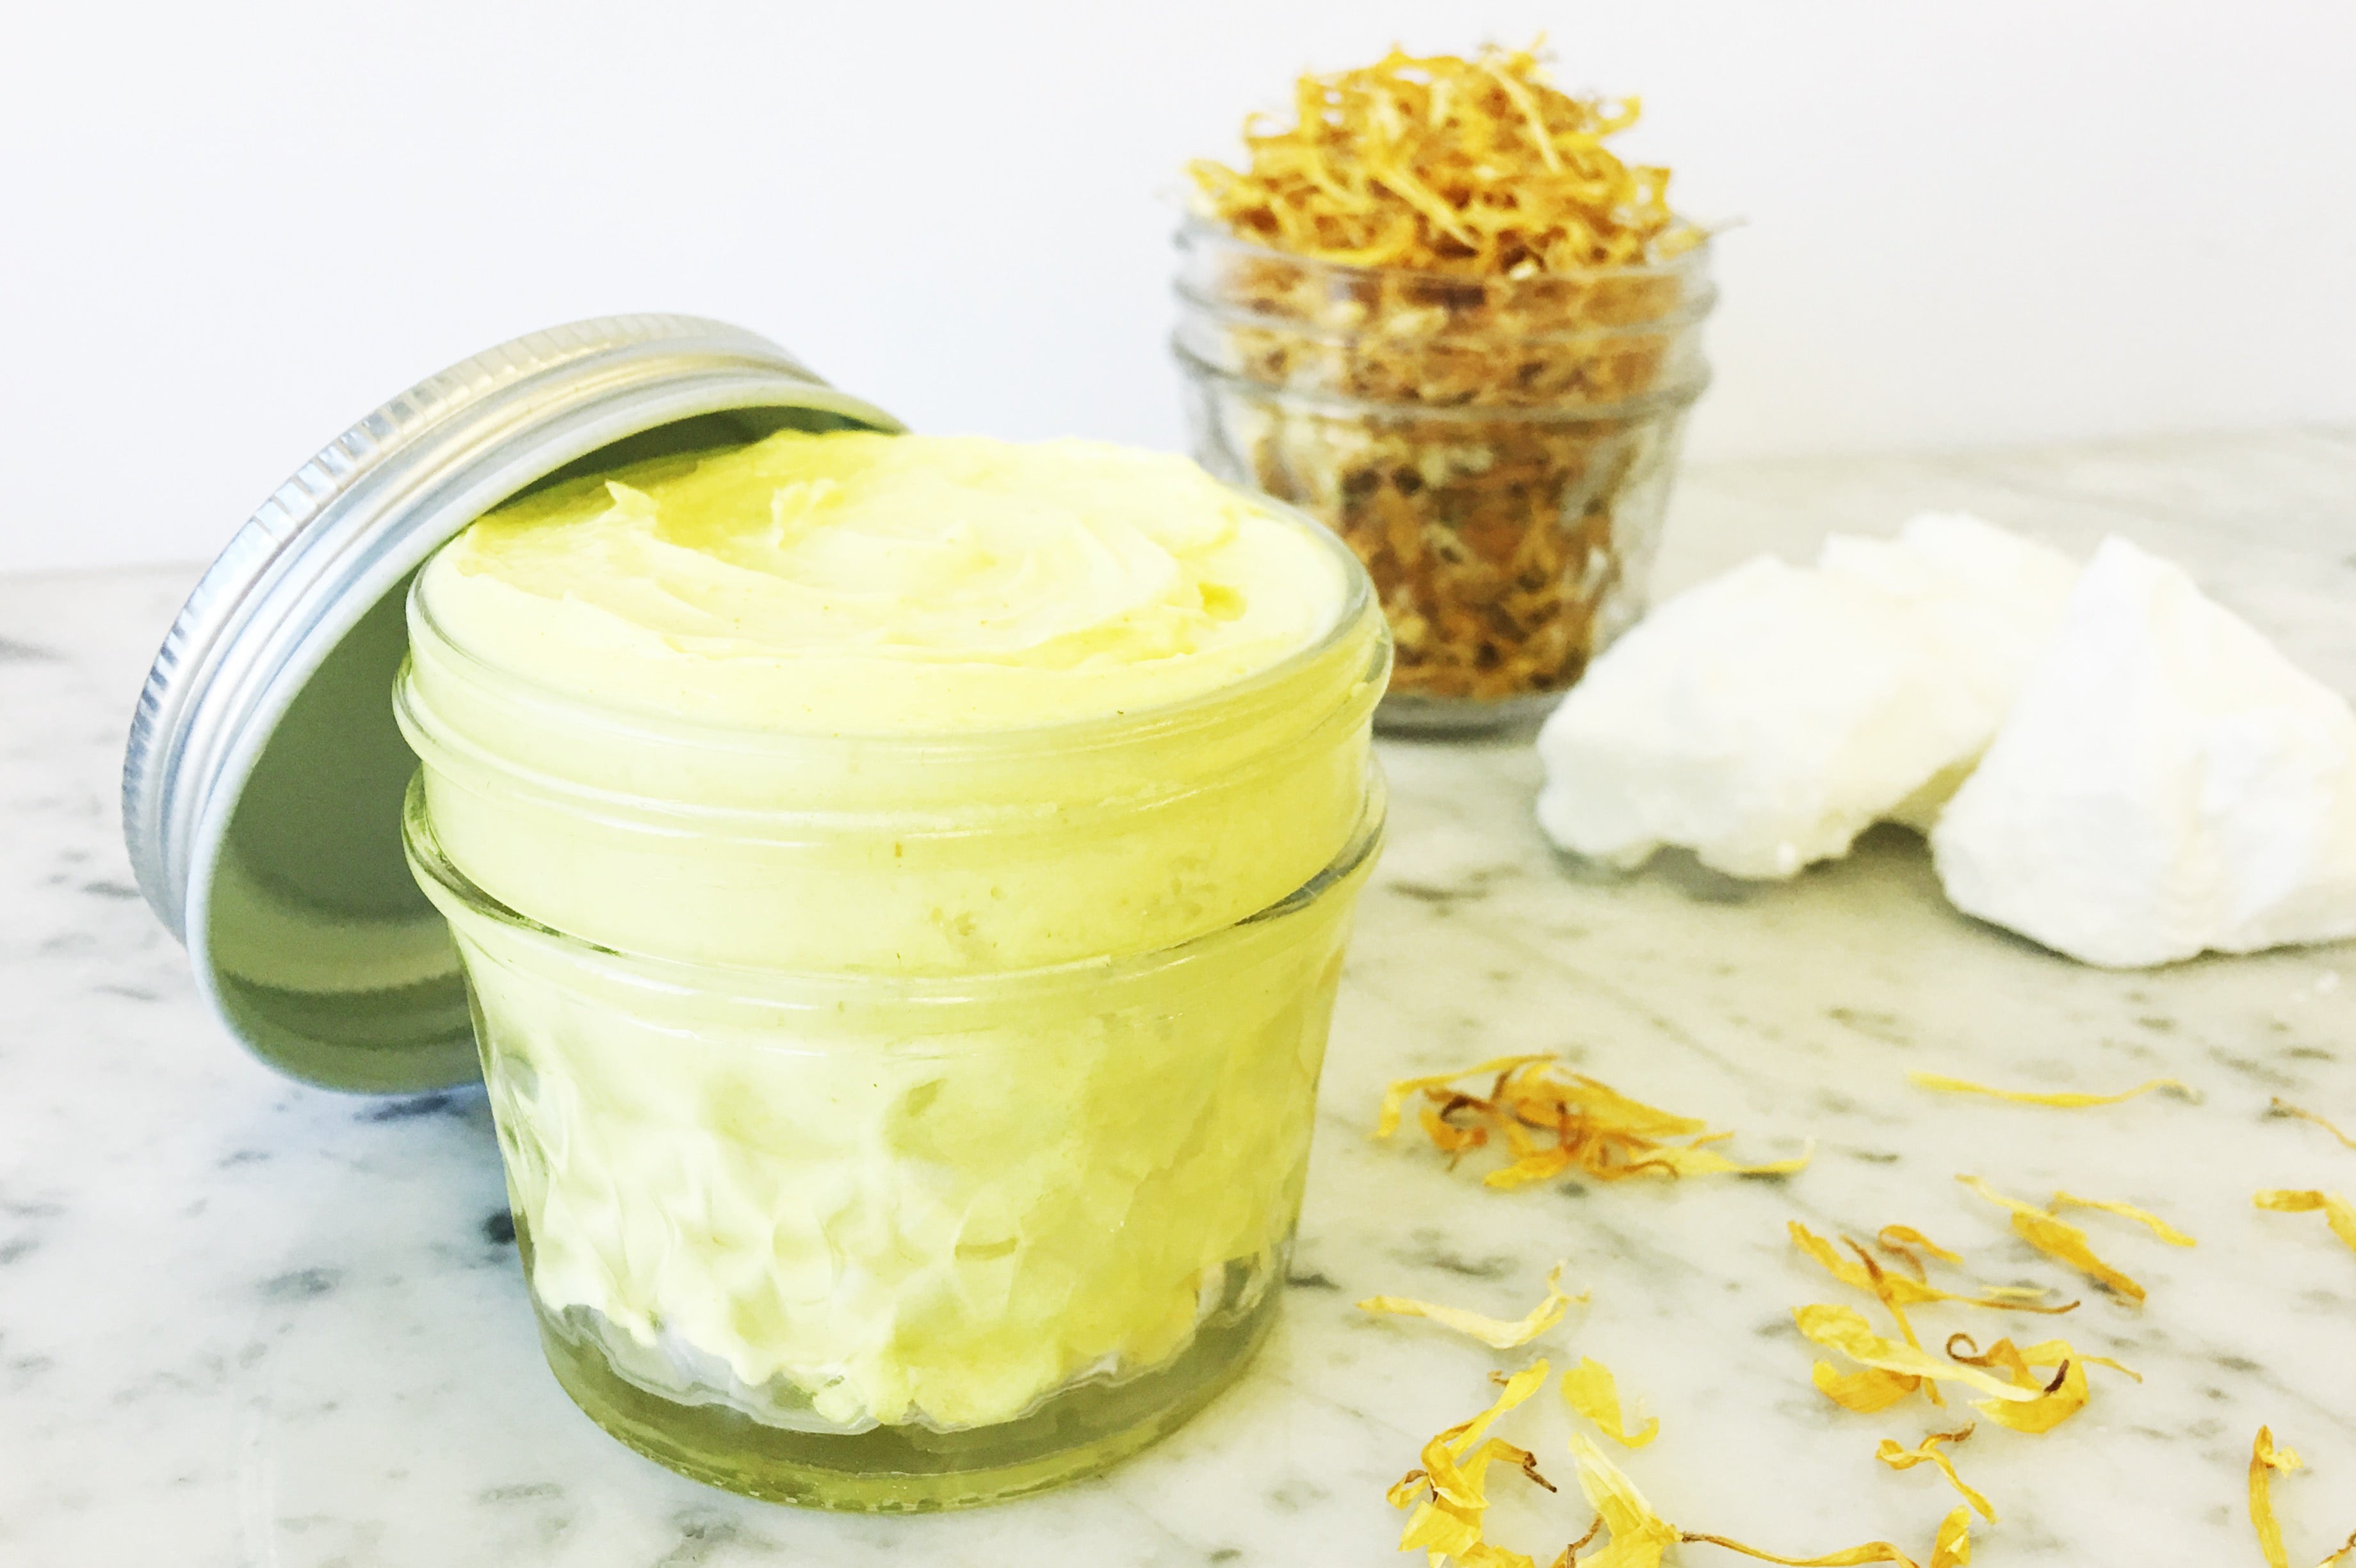 DIY Skin Care at Biome's Naked Natural Beauty Bar - Whipped Calendula and Coconut Body Butter